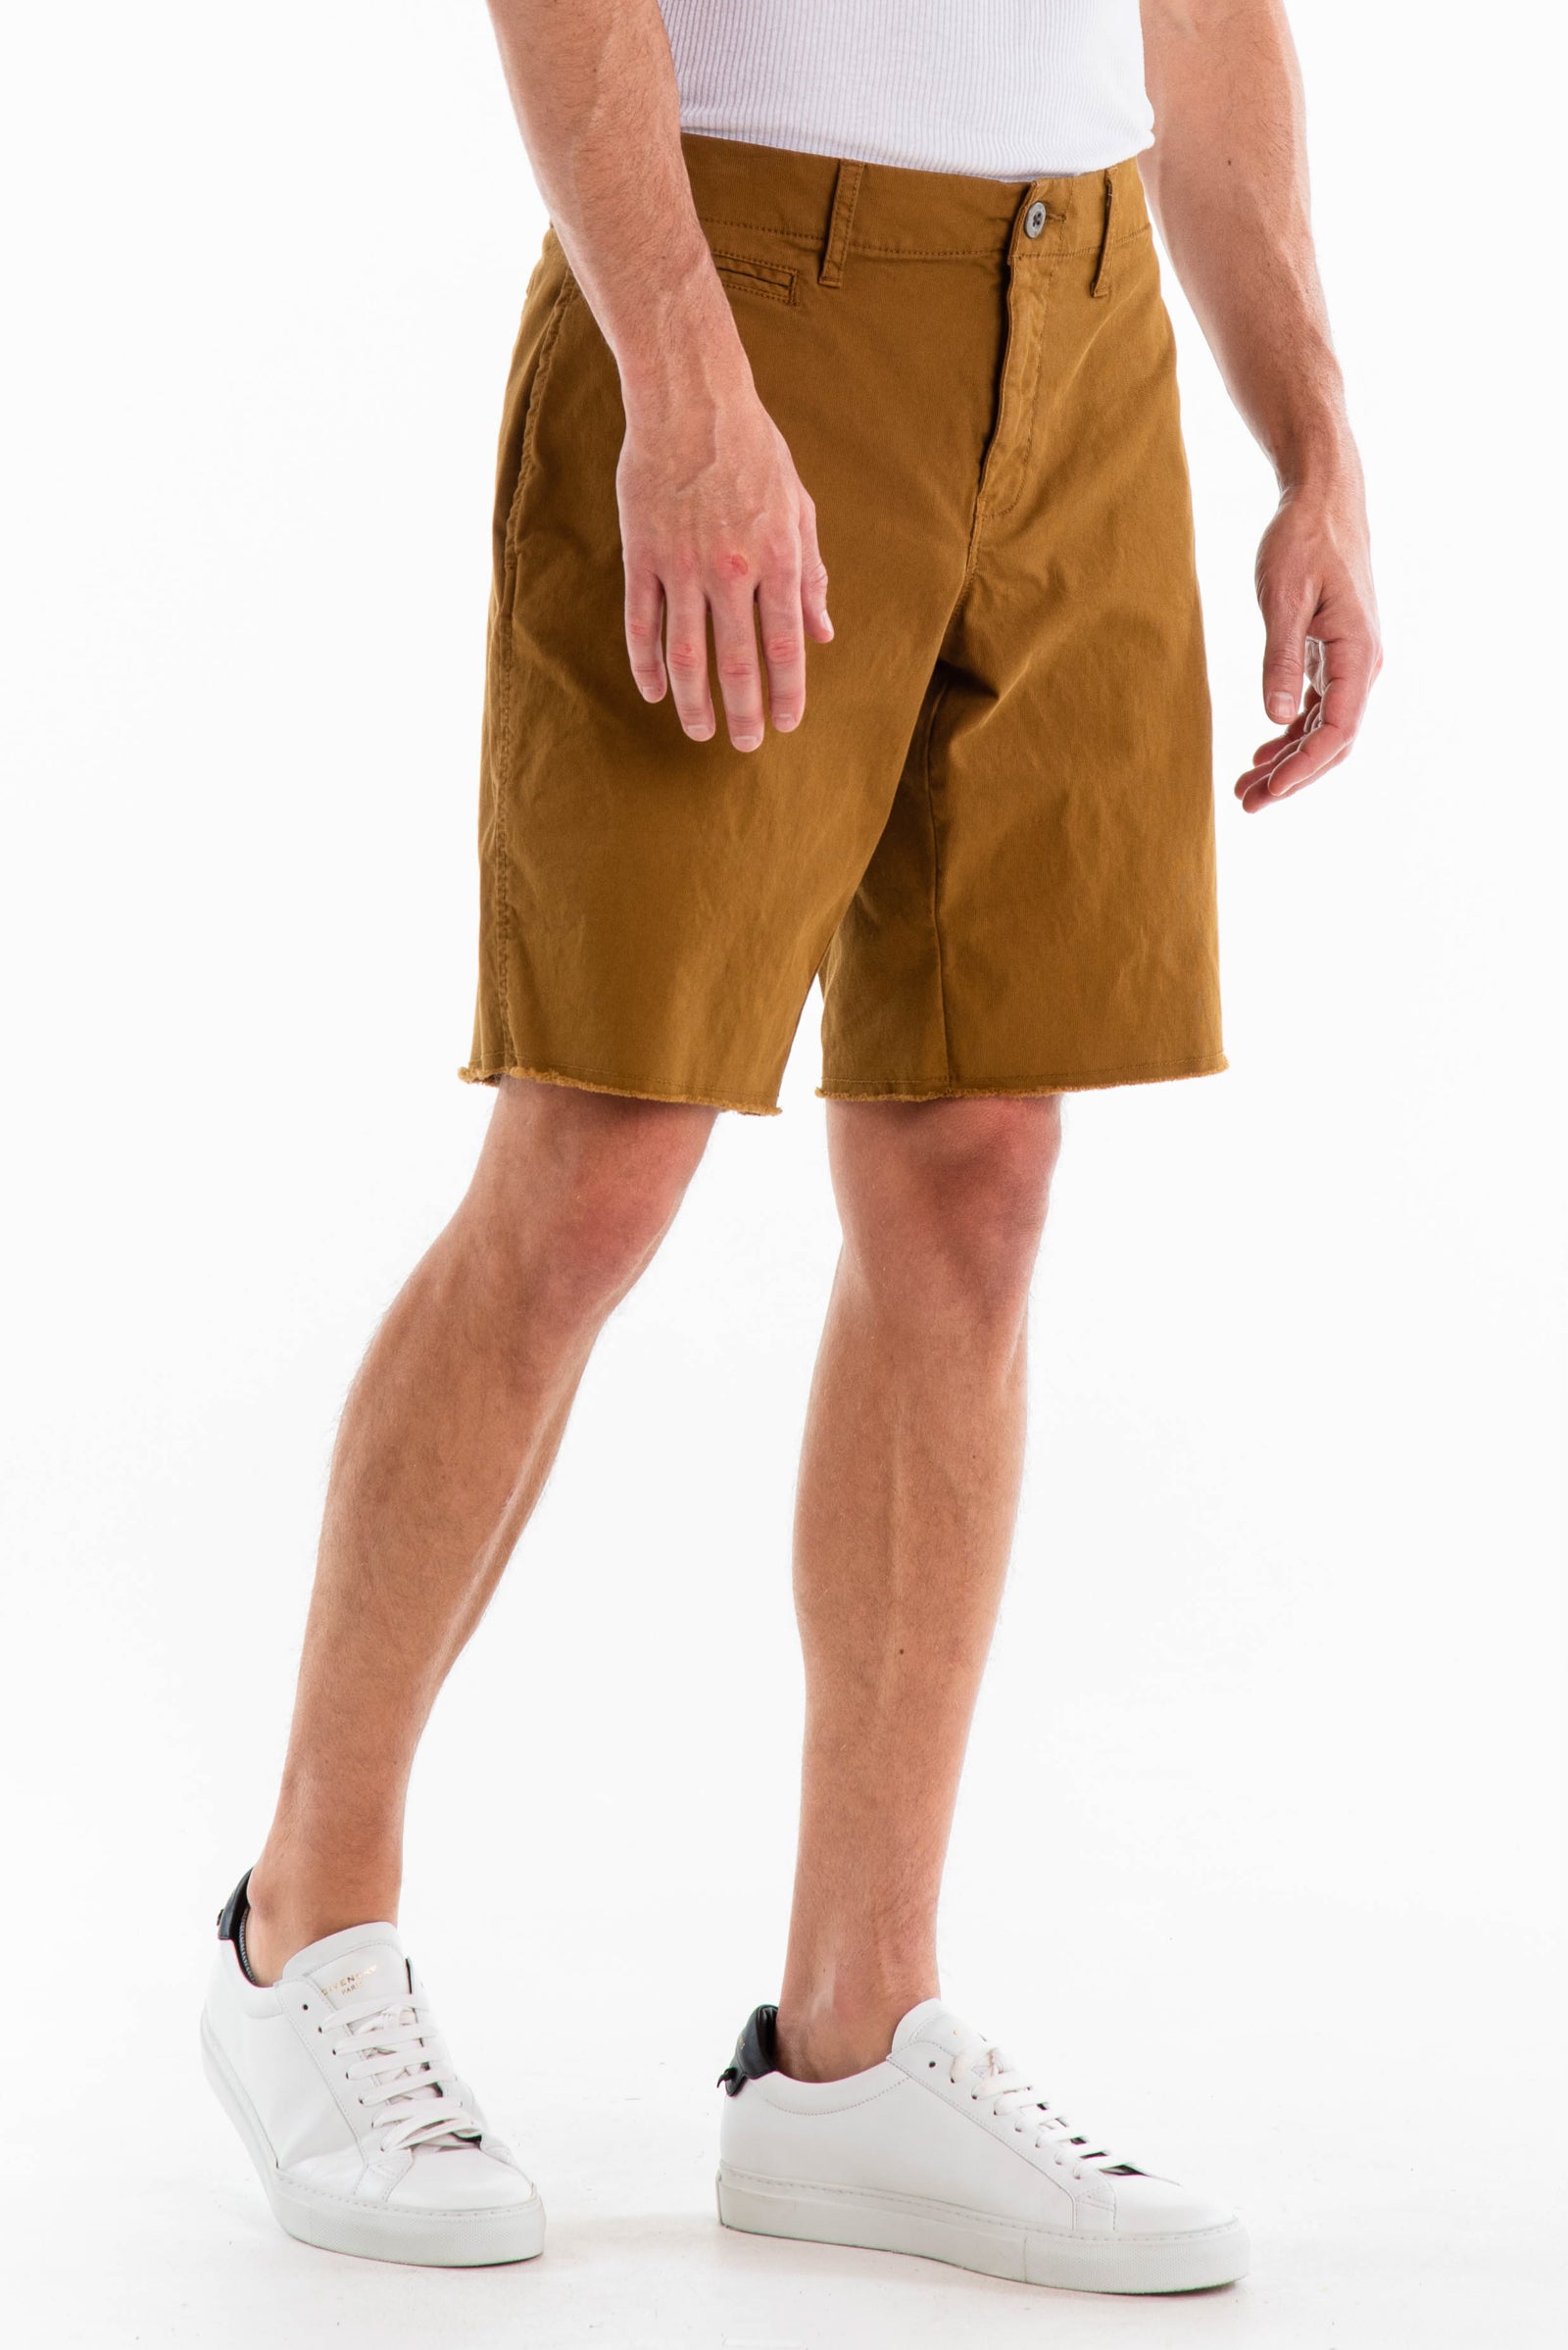 Original Paperbacks Rockland Chino Short in Ochre on Model Cropped Side View